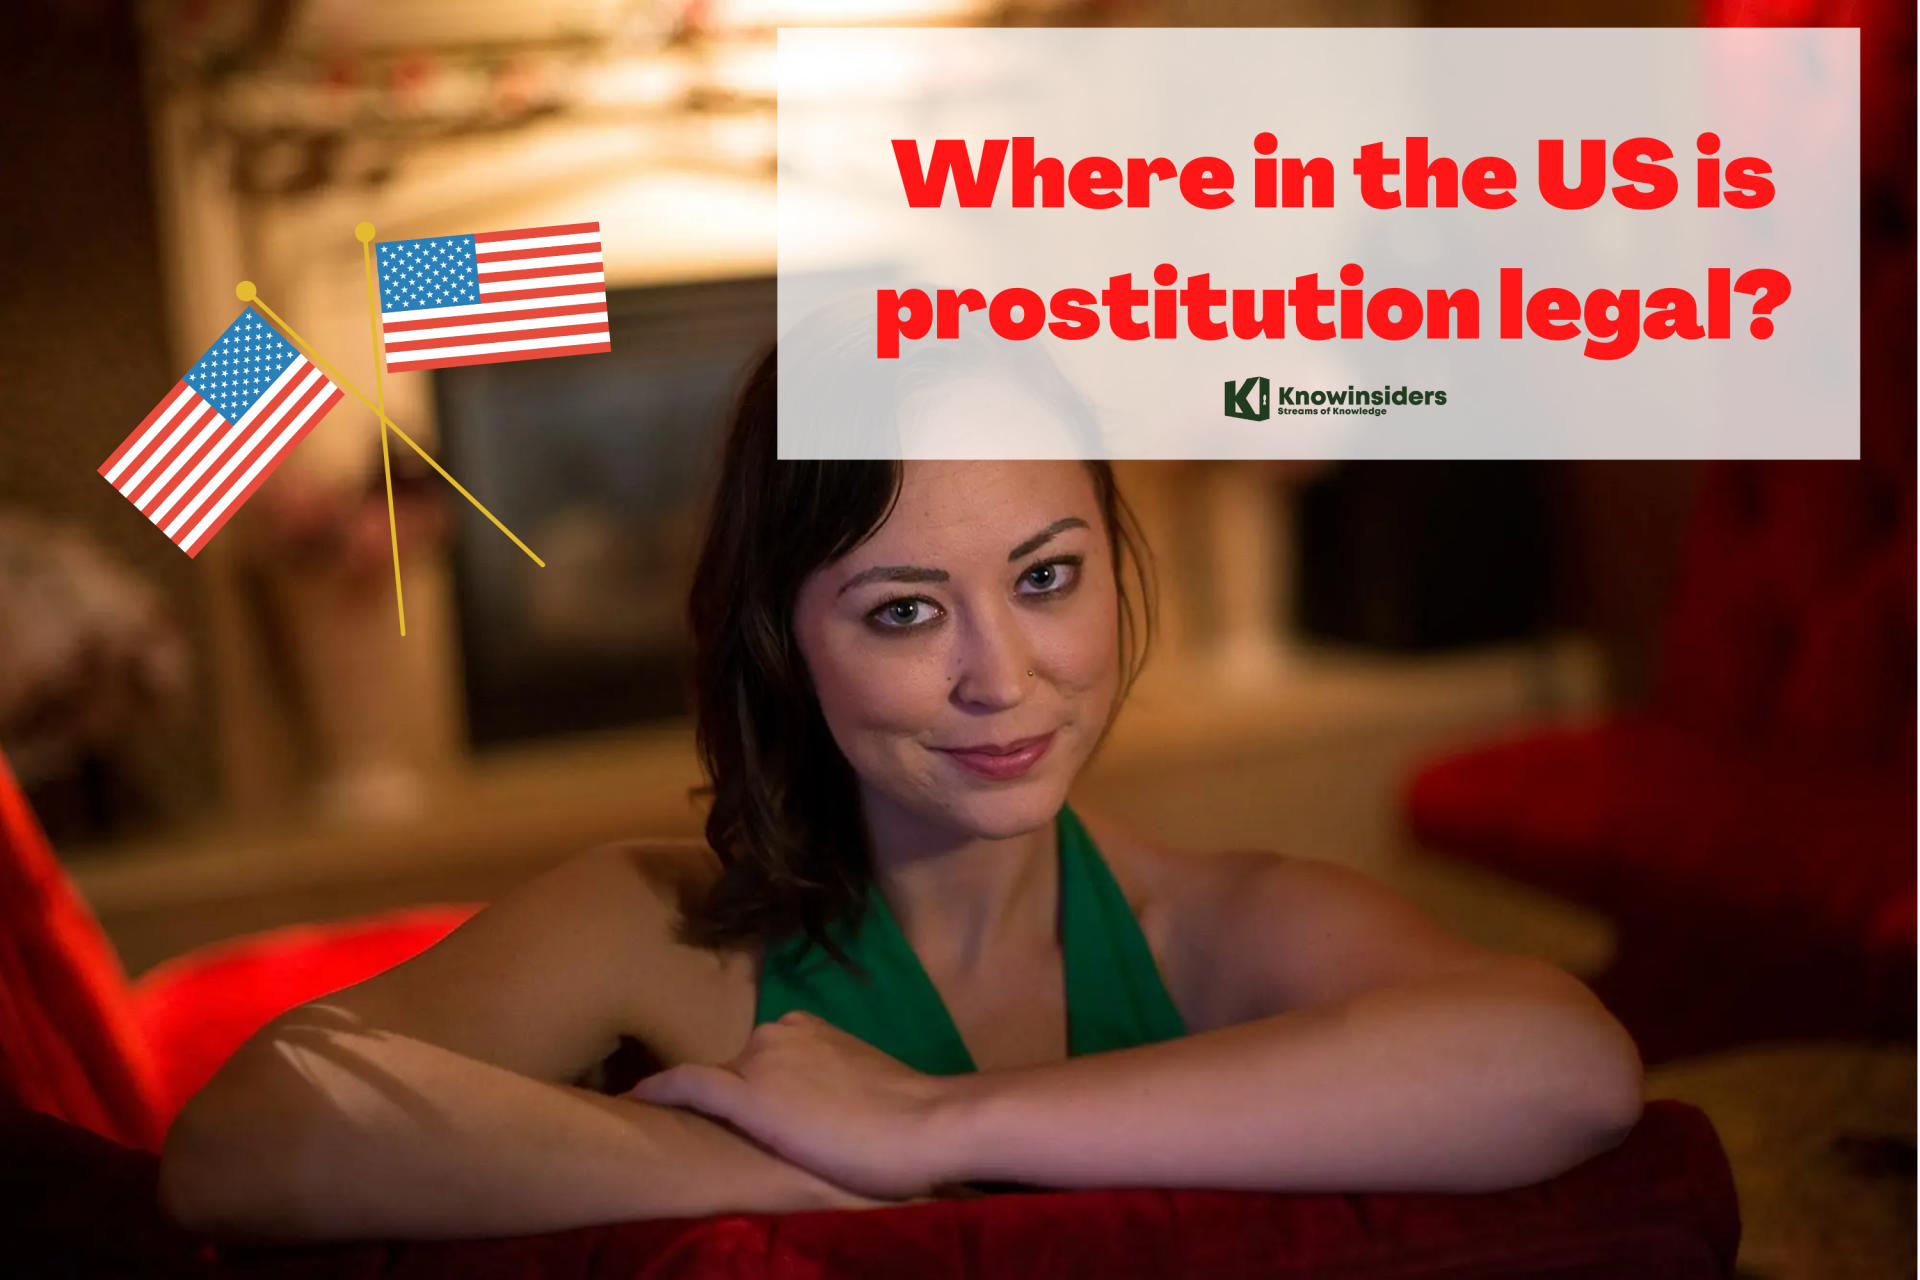 Where Is Prostitution Legal In The US?